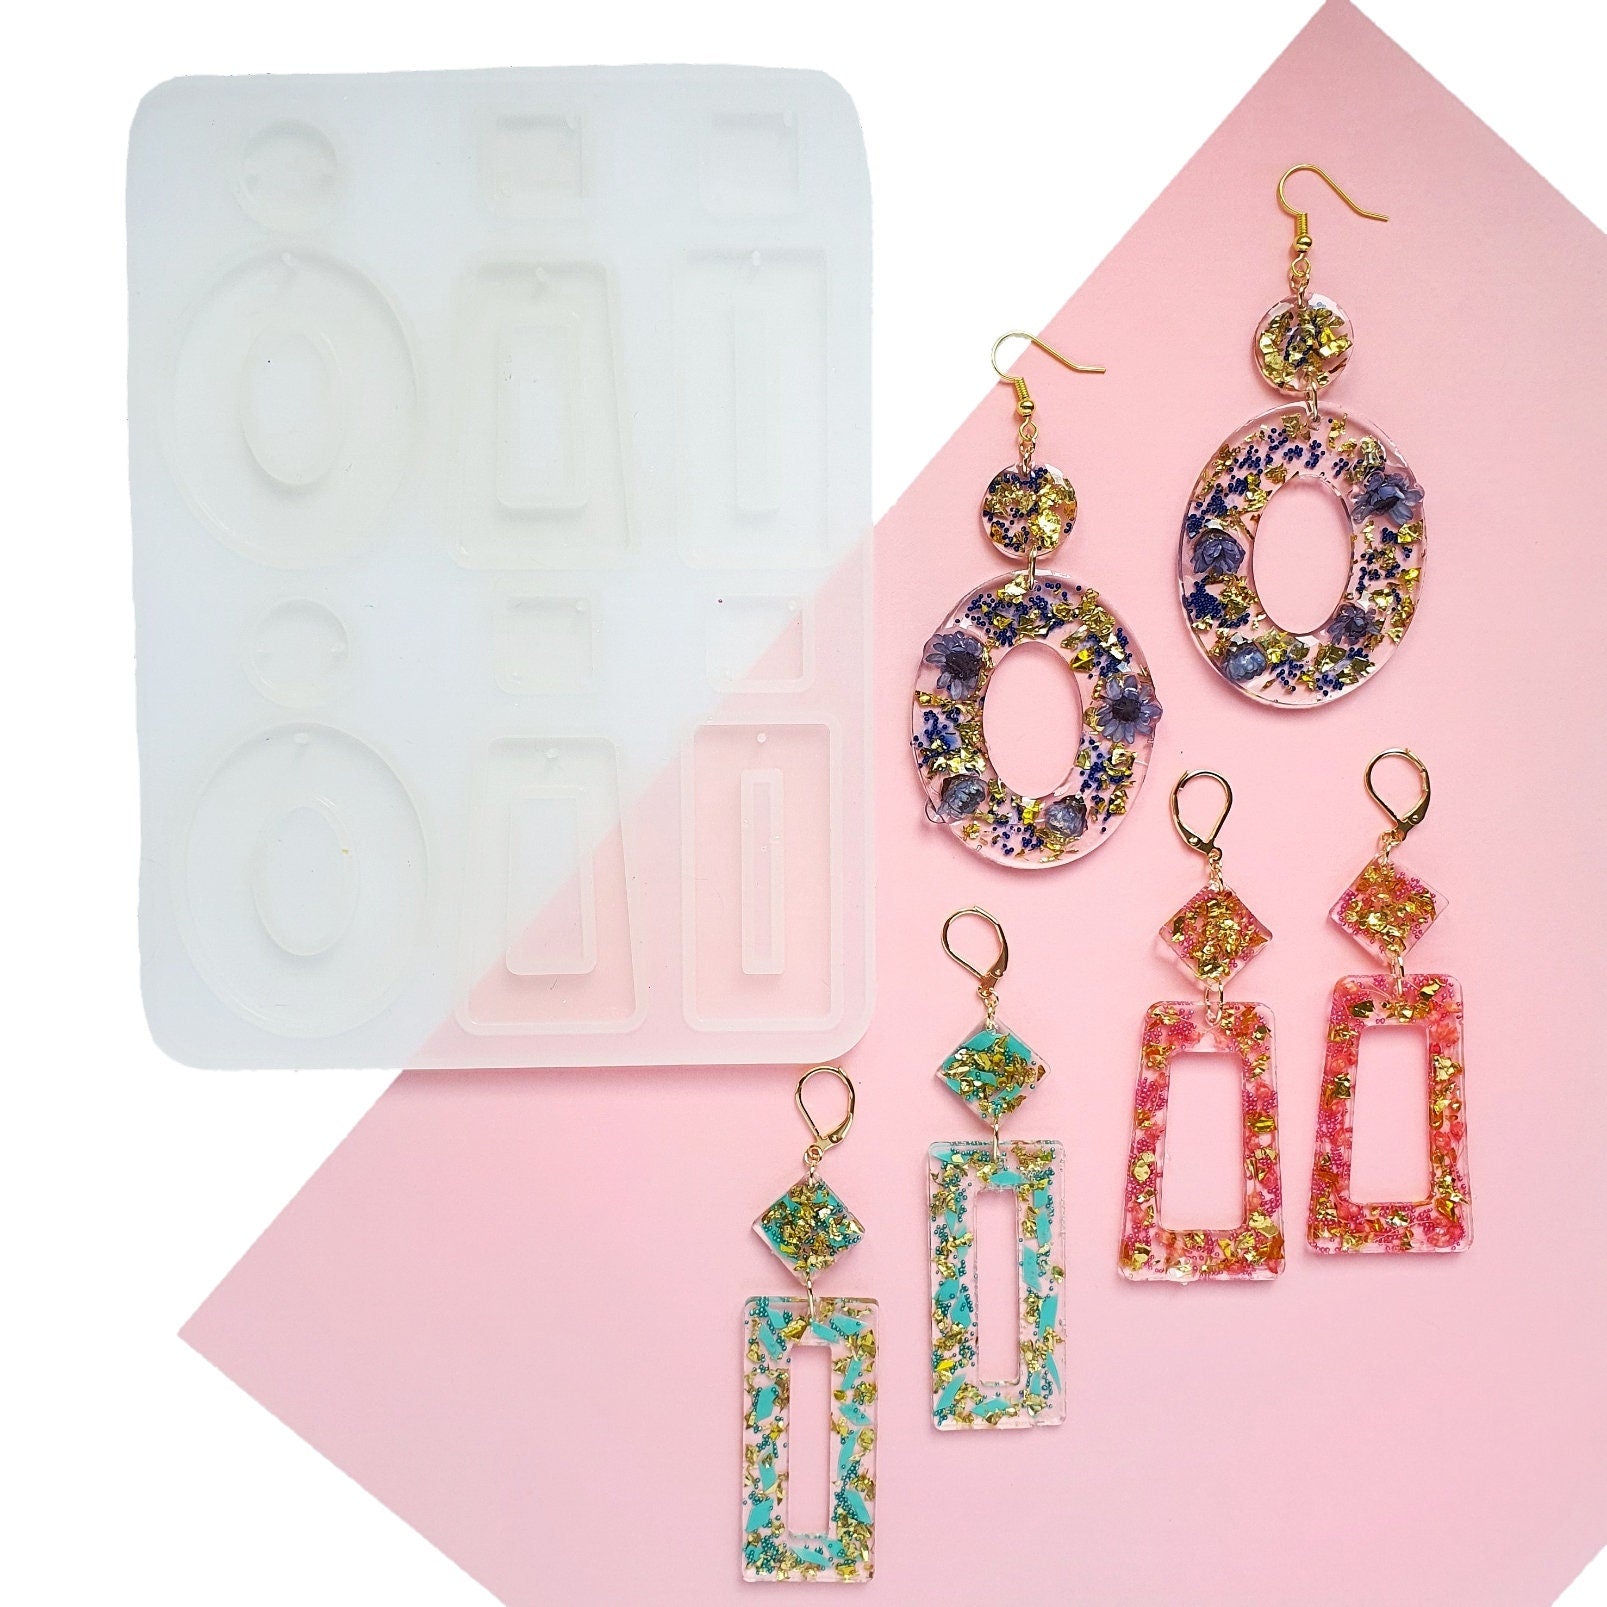 Silicone earrings mold for resin and epoxy 3 designs in 1 mold Geometry Jewelry mould - Luxy Kraft